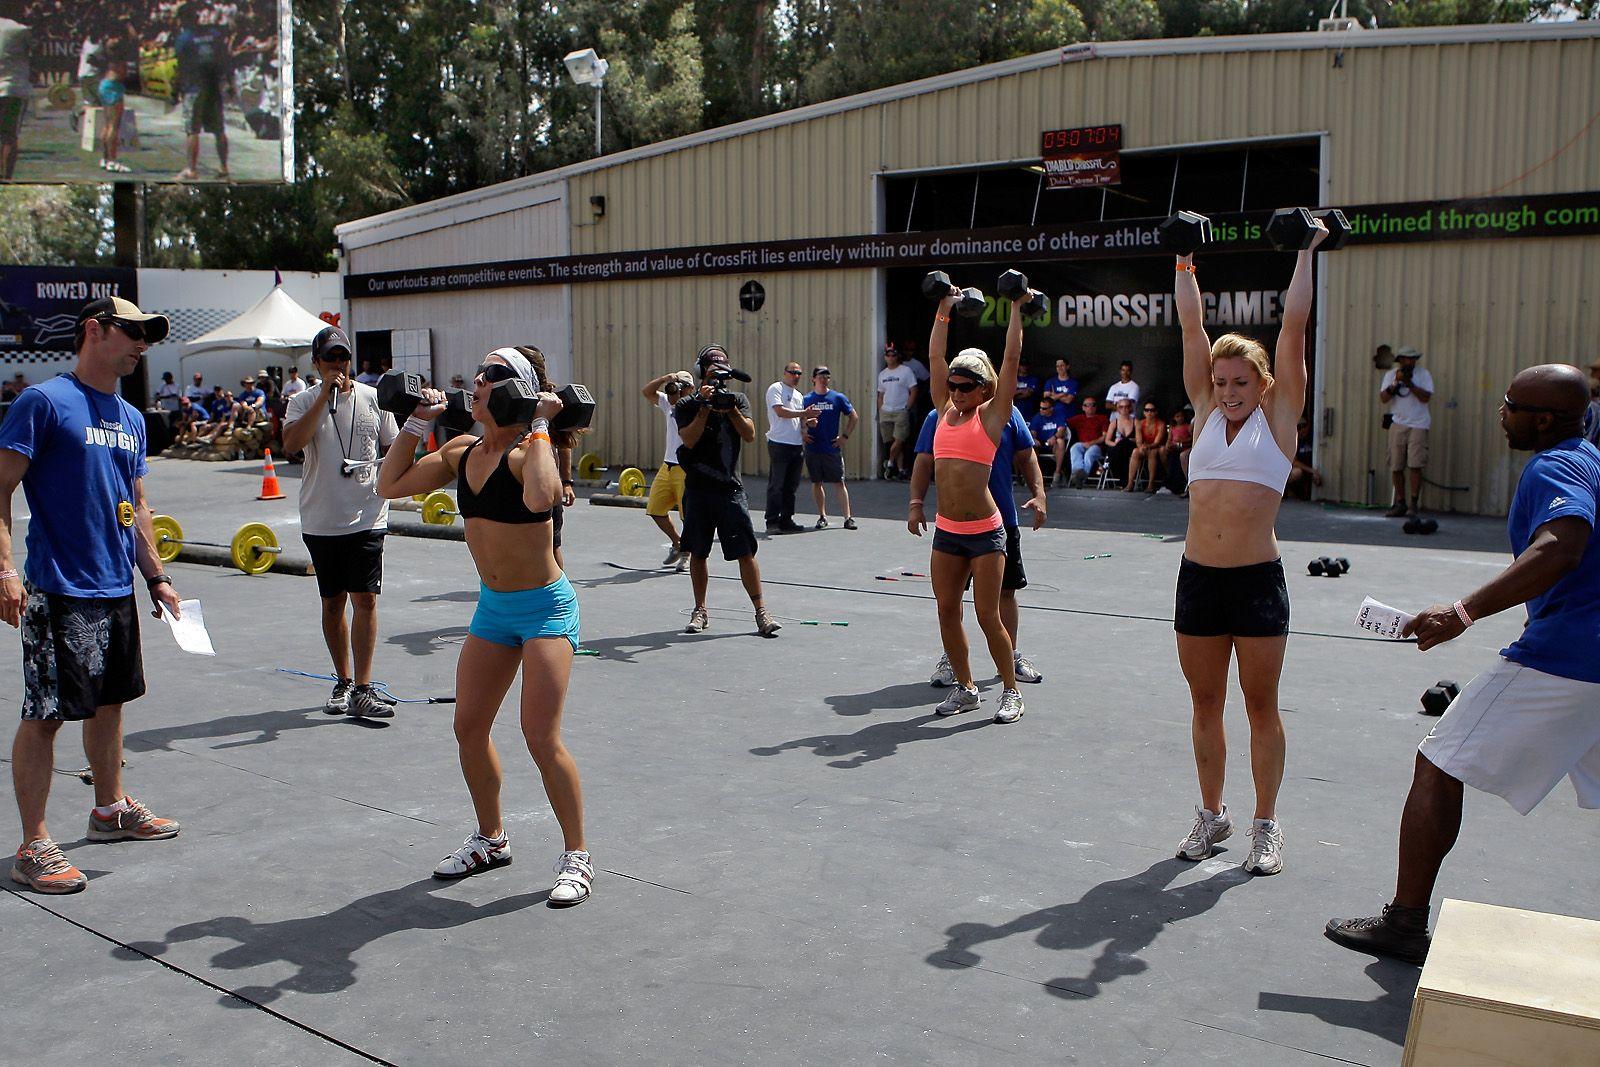 What You Need To Know About The CrossFit Games